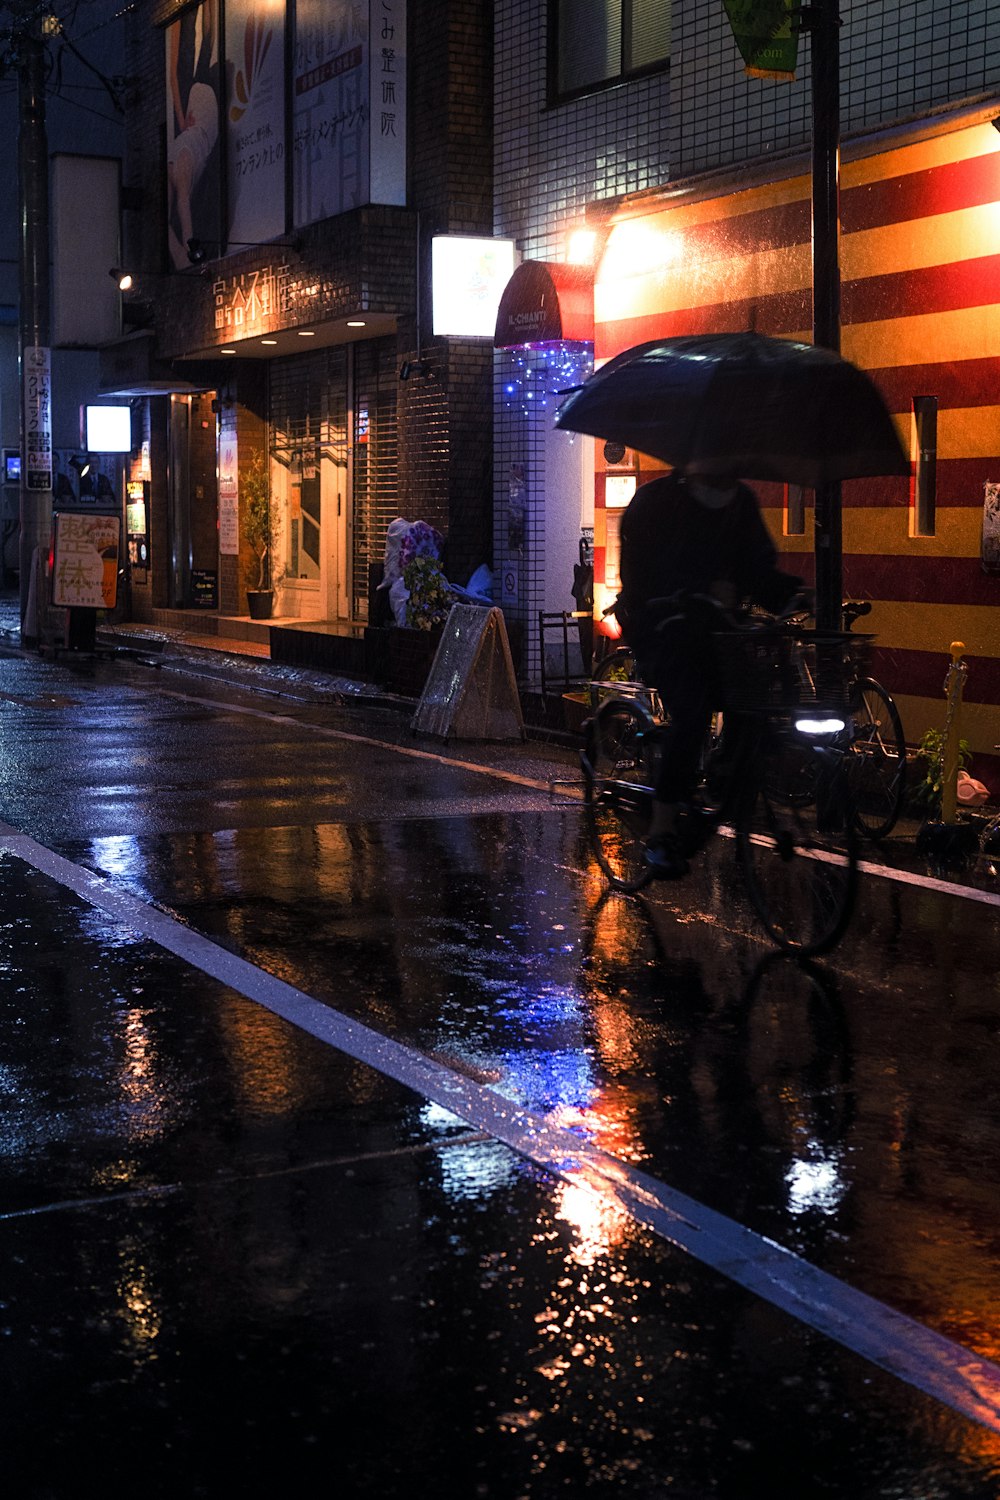 a person riding a bicycle with an umbrella